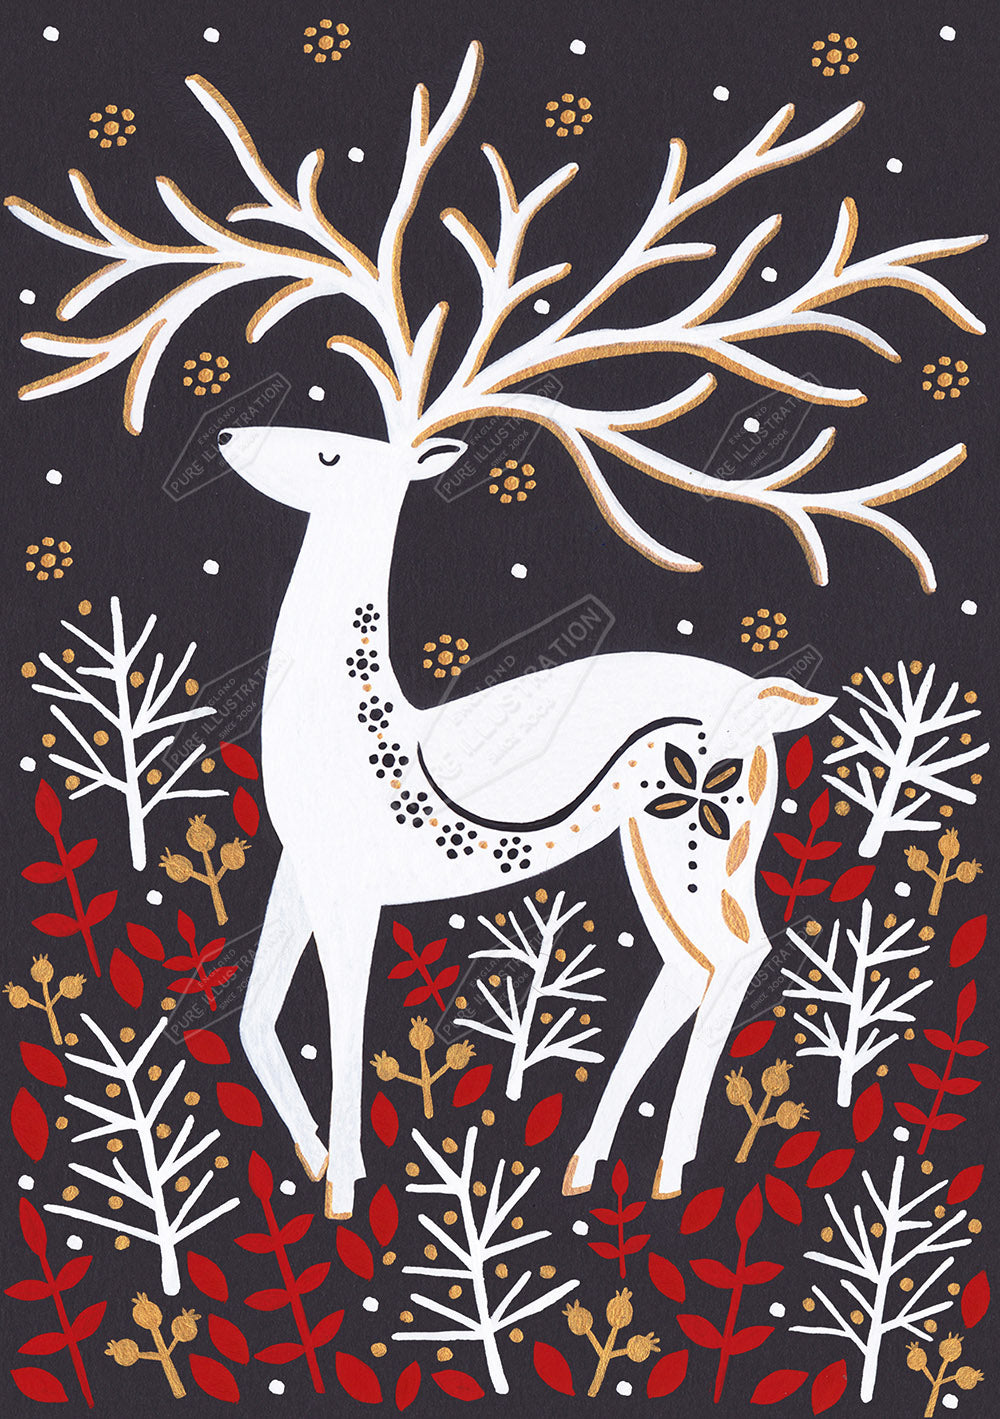 00027244SSN- Sian Summerhayes is represented by Pure Art Licensing Agency - Christmas Greeting Card Design